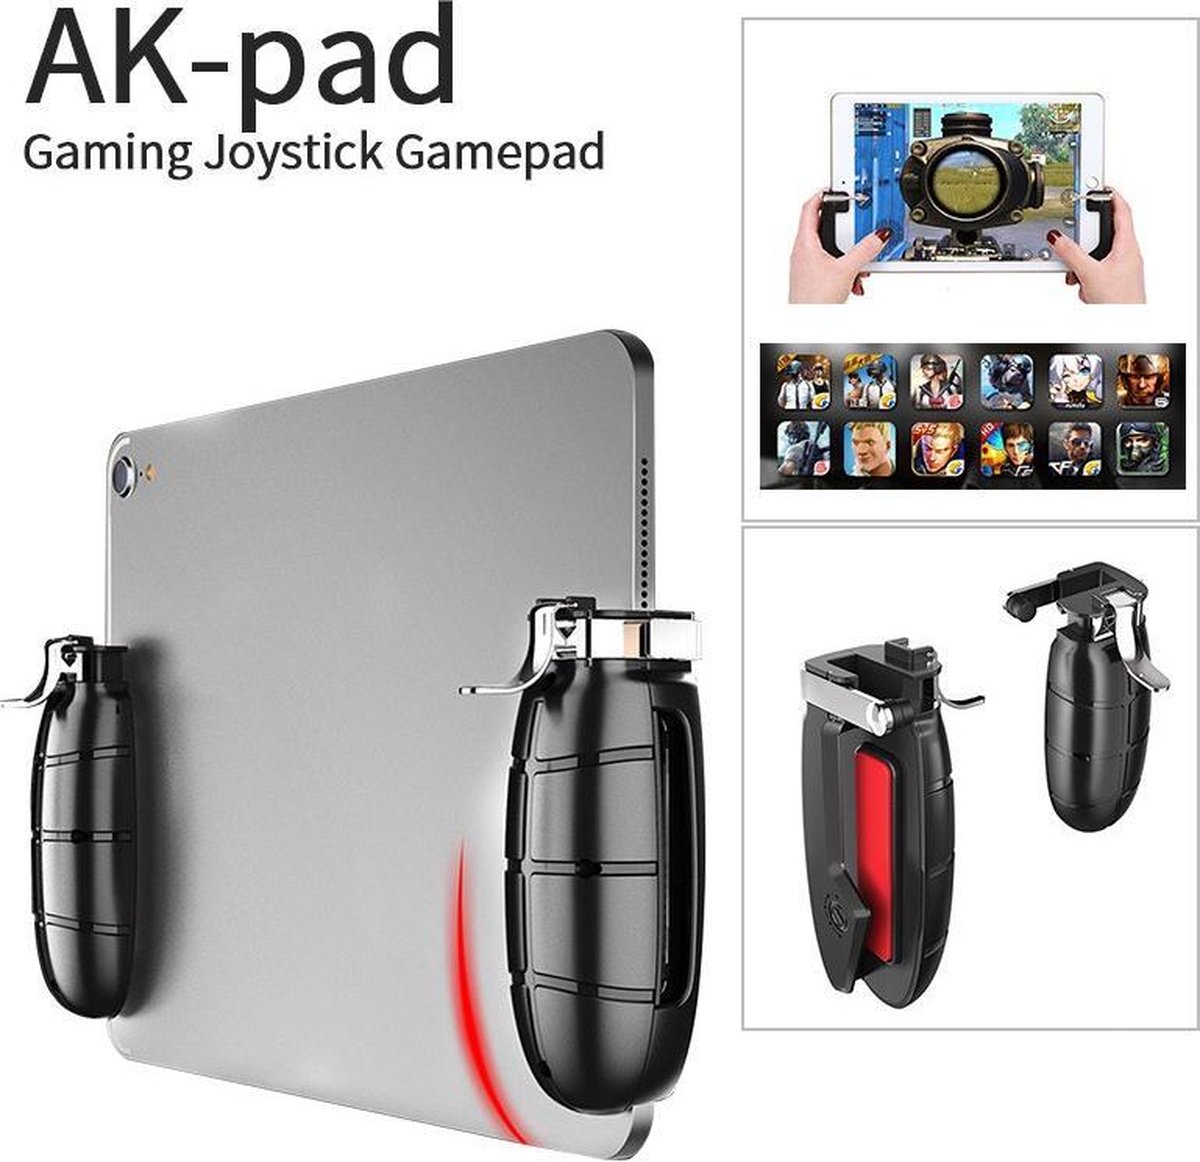 Accessoire gaming GAMEVICE GV150 - Gamevice pour iPad Pas Cher 